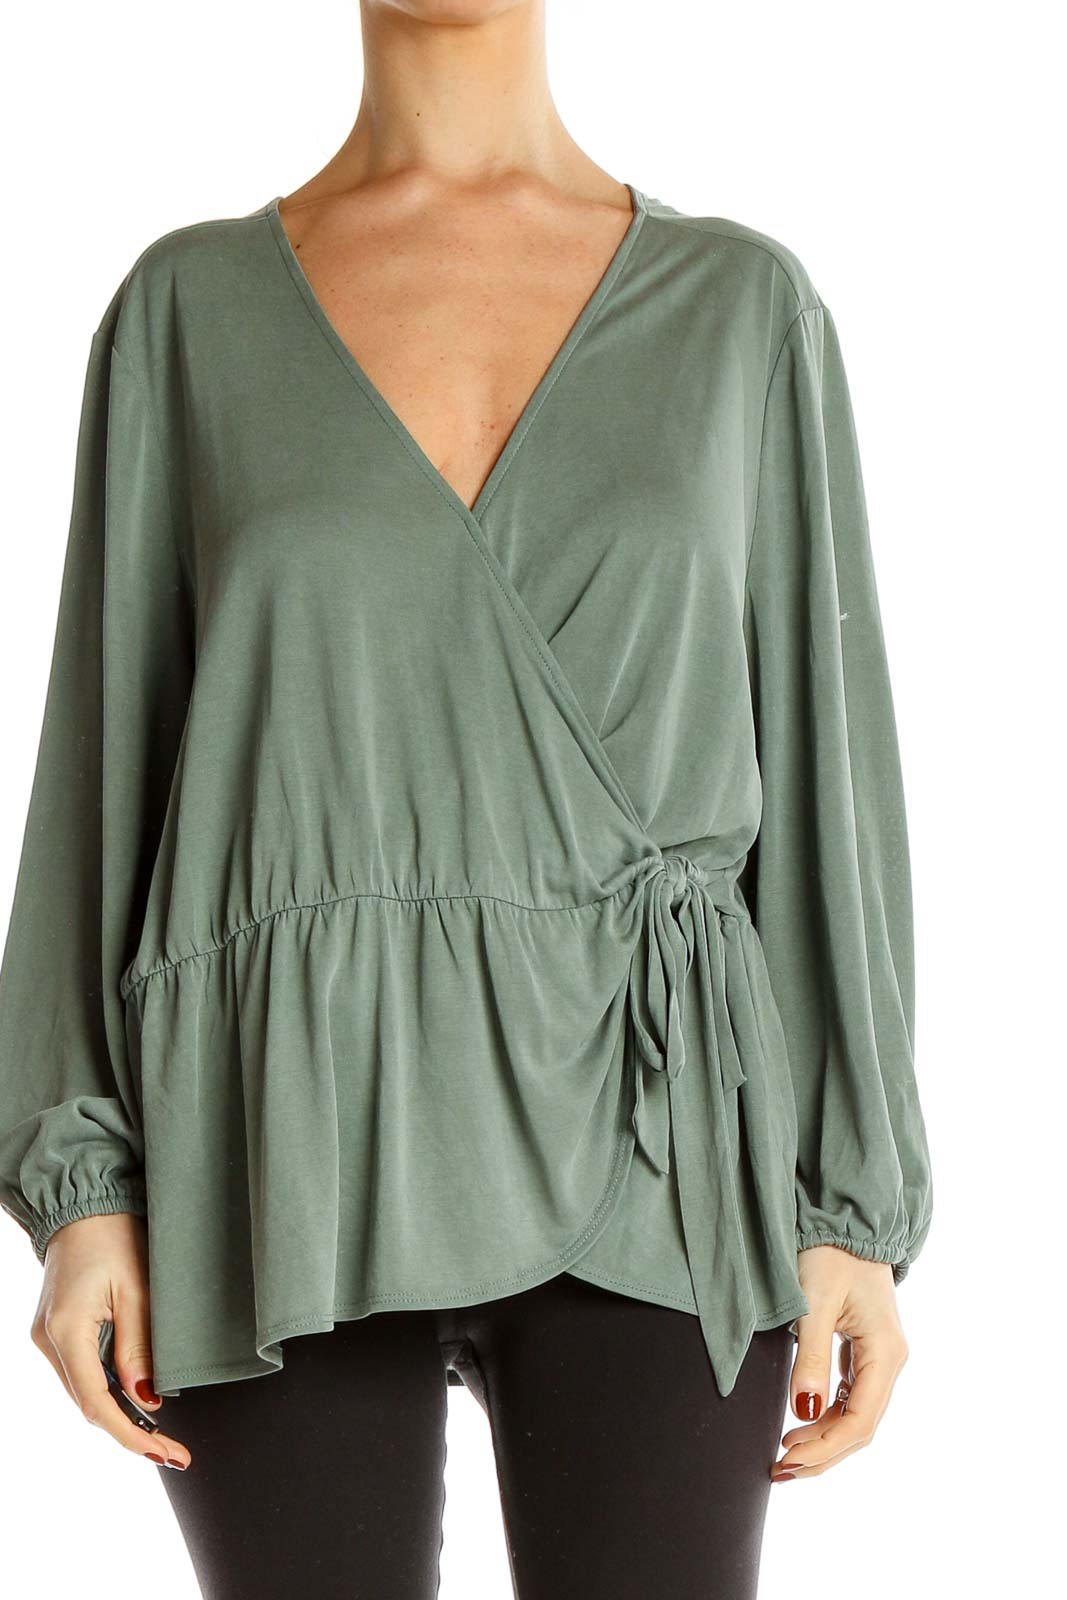 Green Chic Wrap Blouse Front